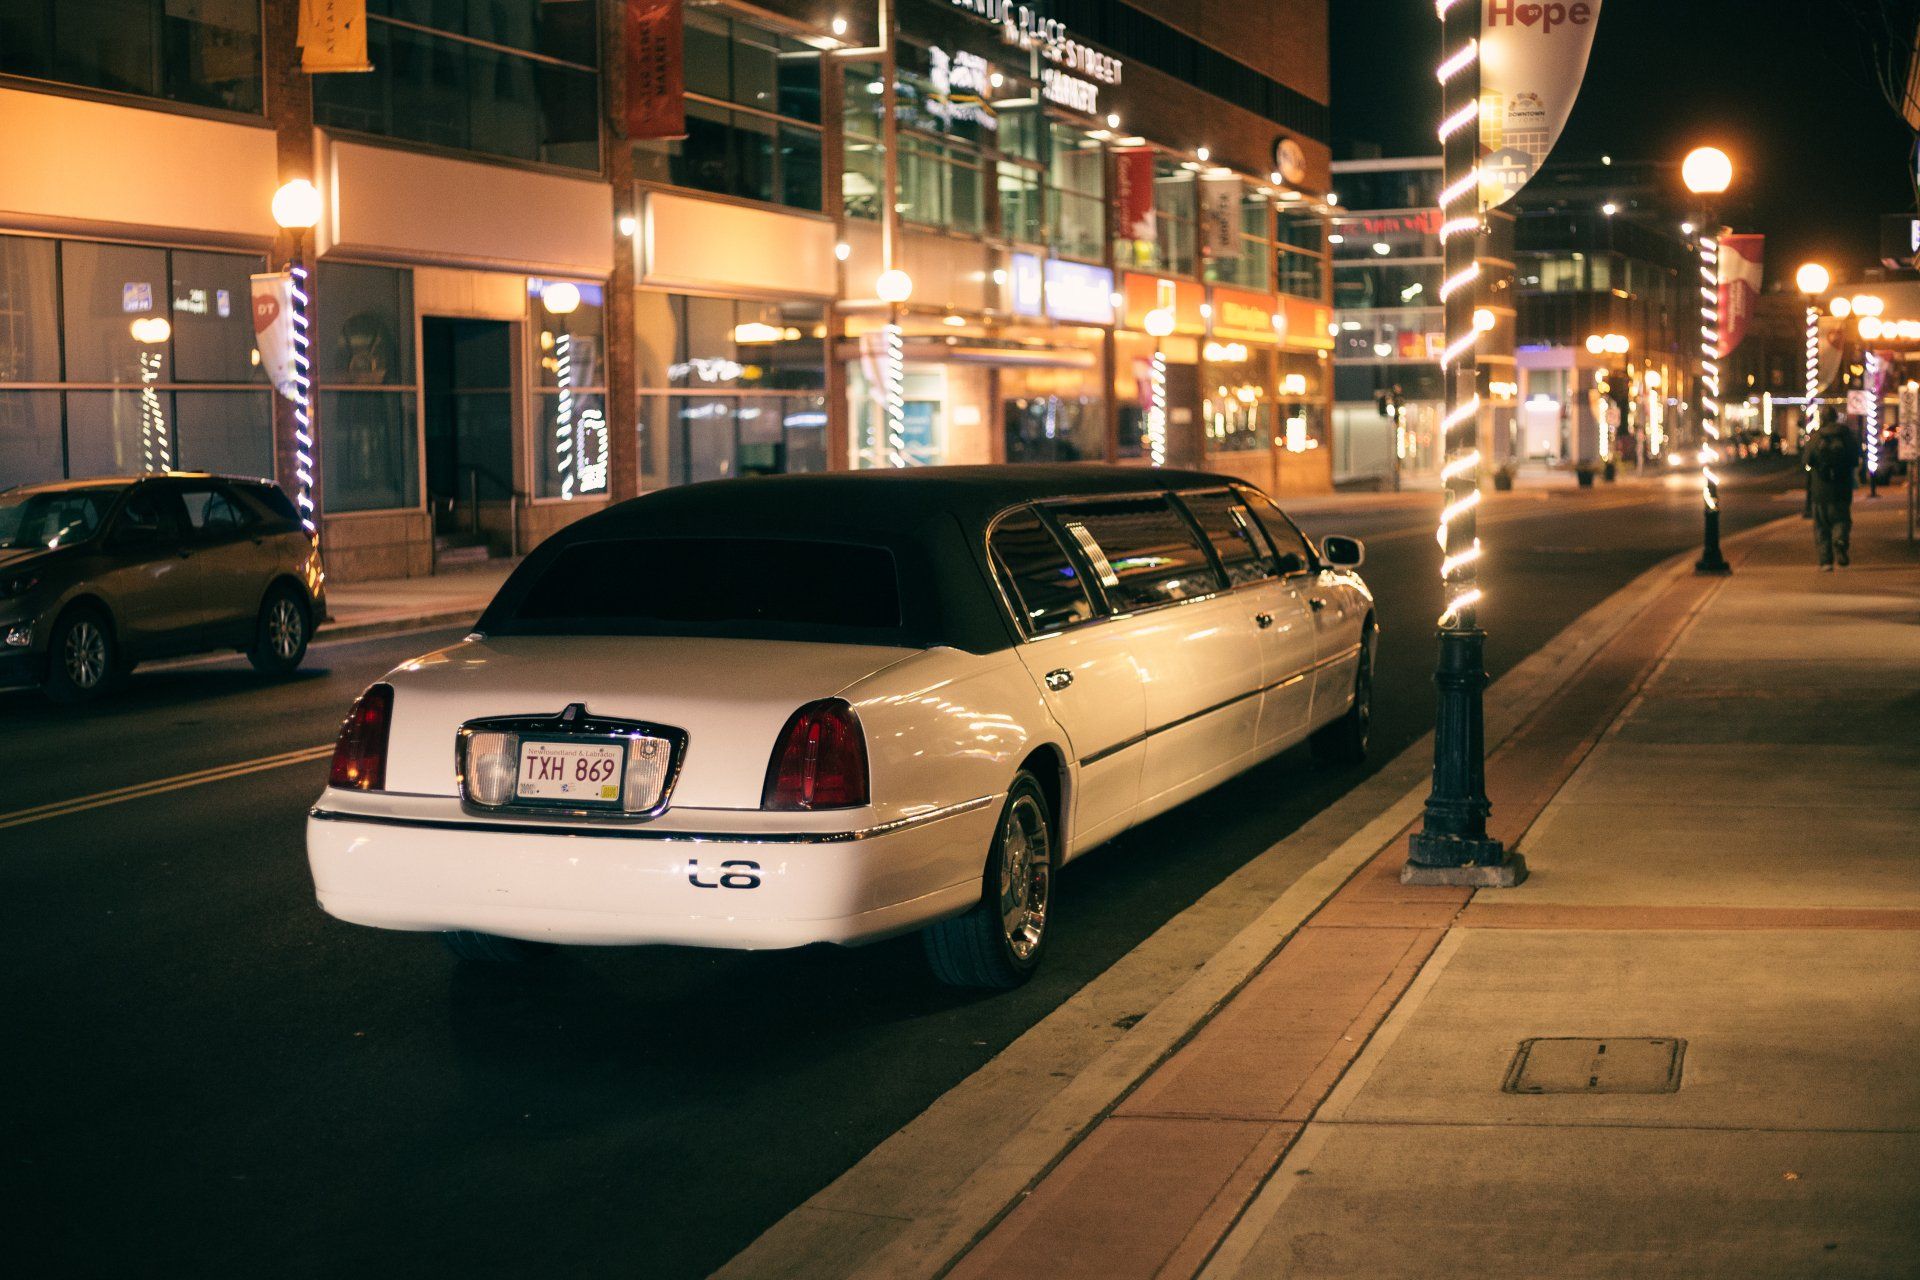 A white limousine is parked on a city street at night